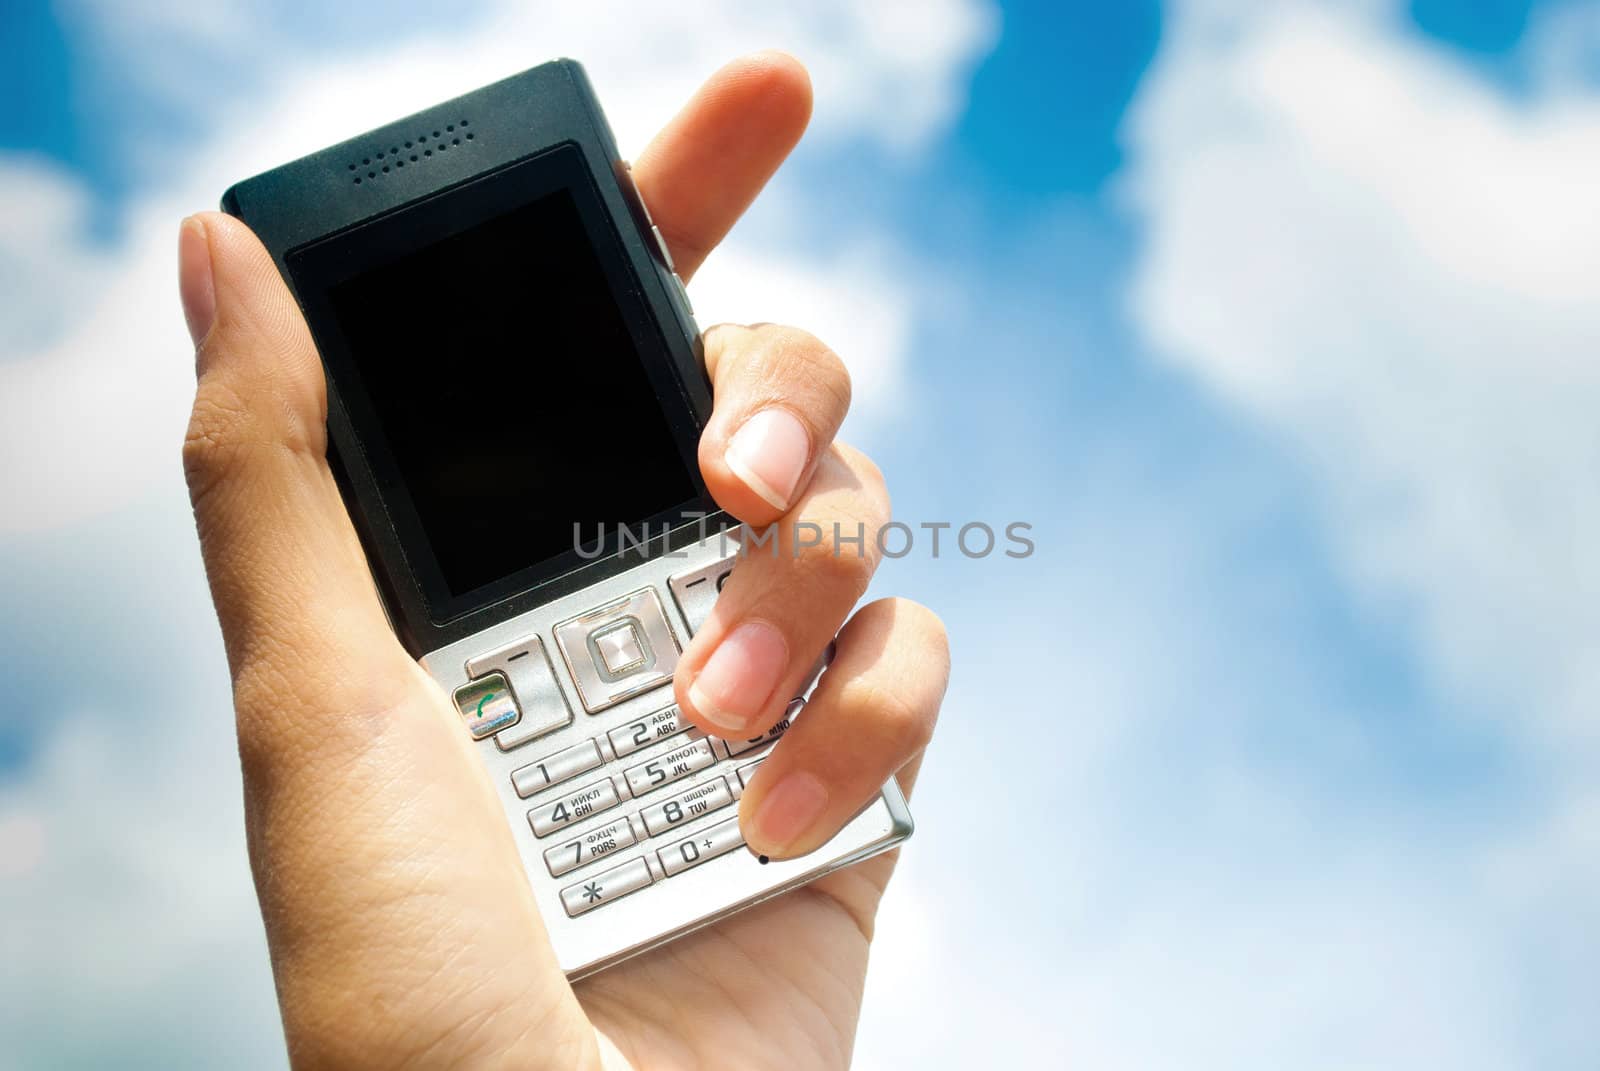 Mobile phone in hand over blue sky background. Clouds.